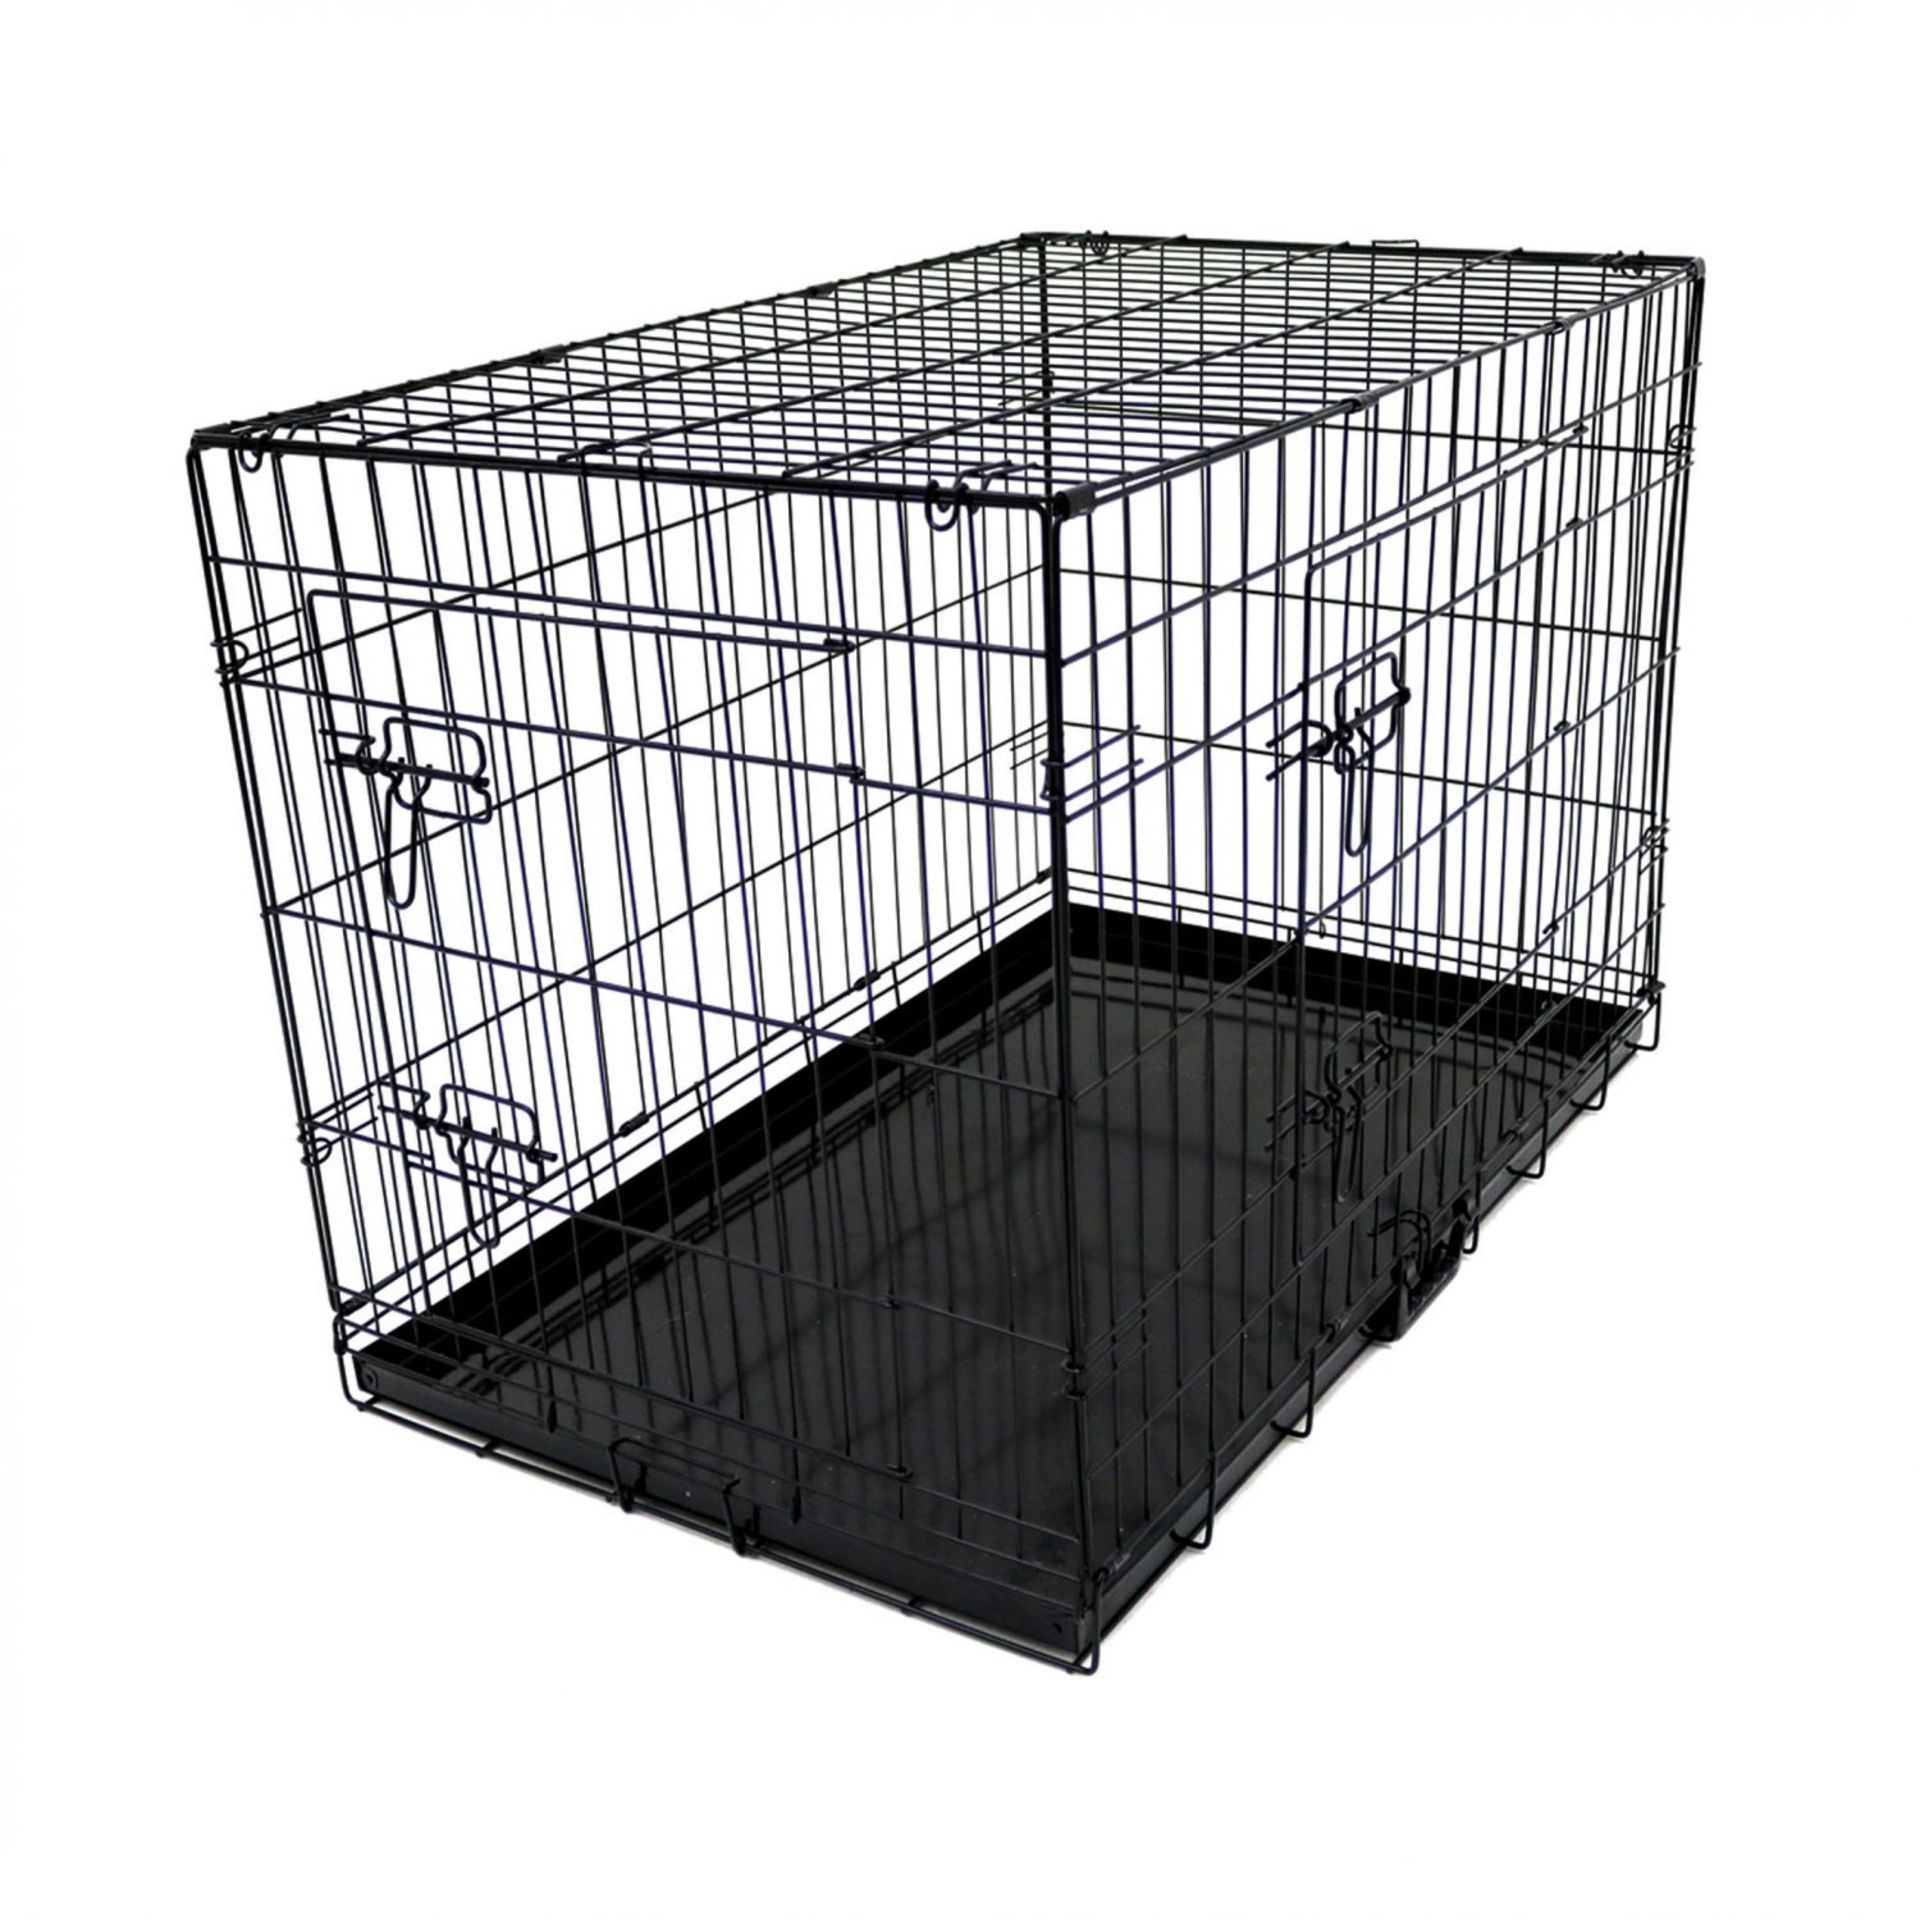 (D13) 36" Folding Metal Dog Cage Puppy Transport Crate Pet Carrier Fully Foldable for Transpor...